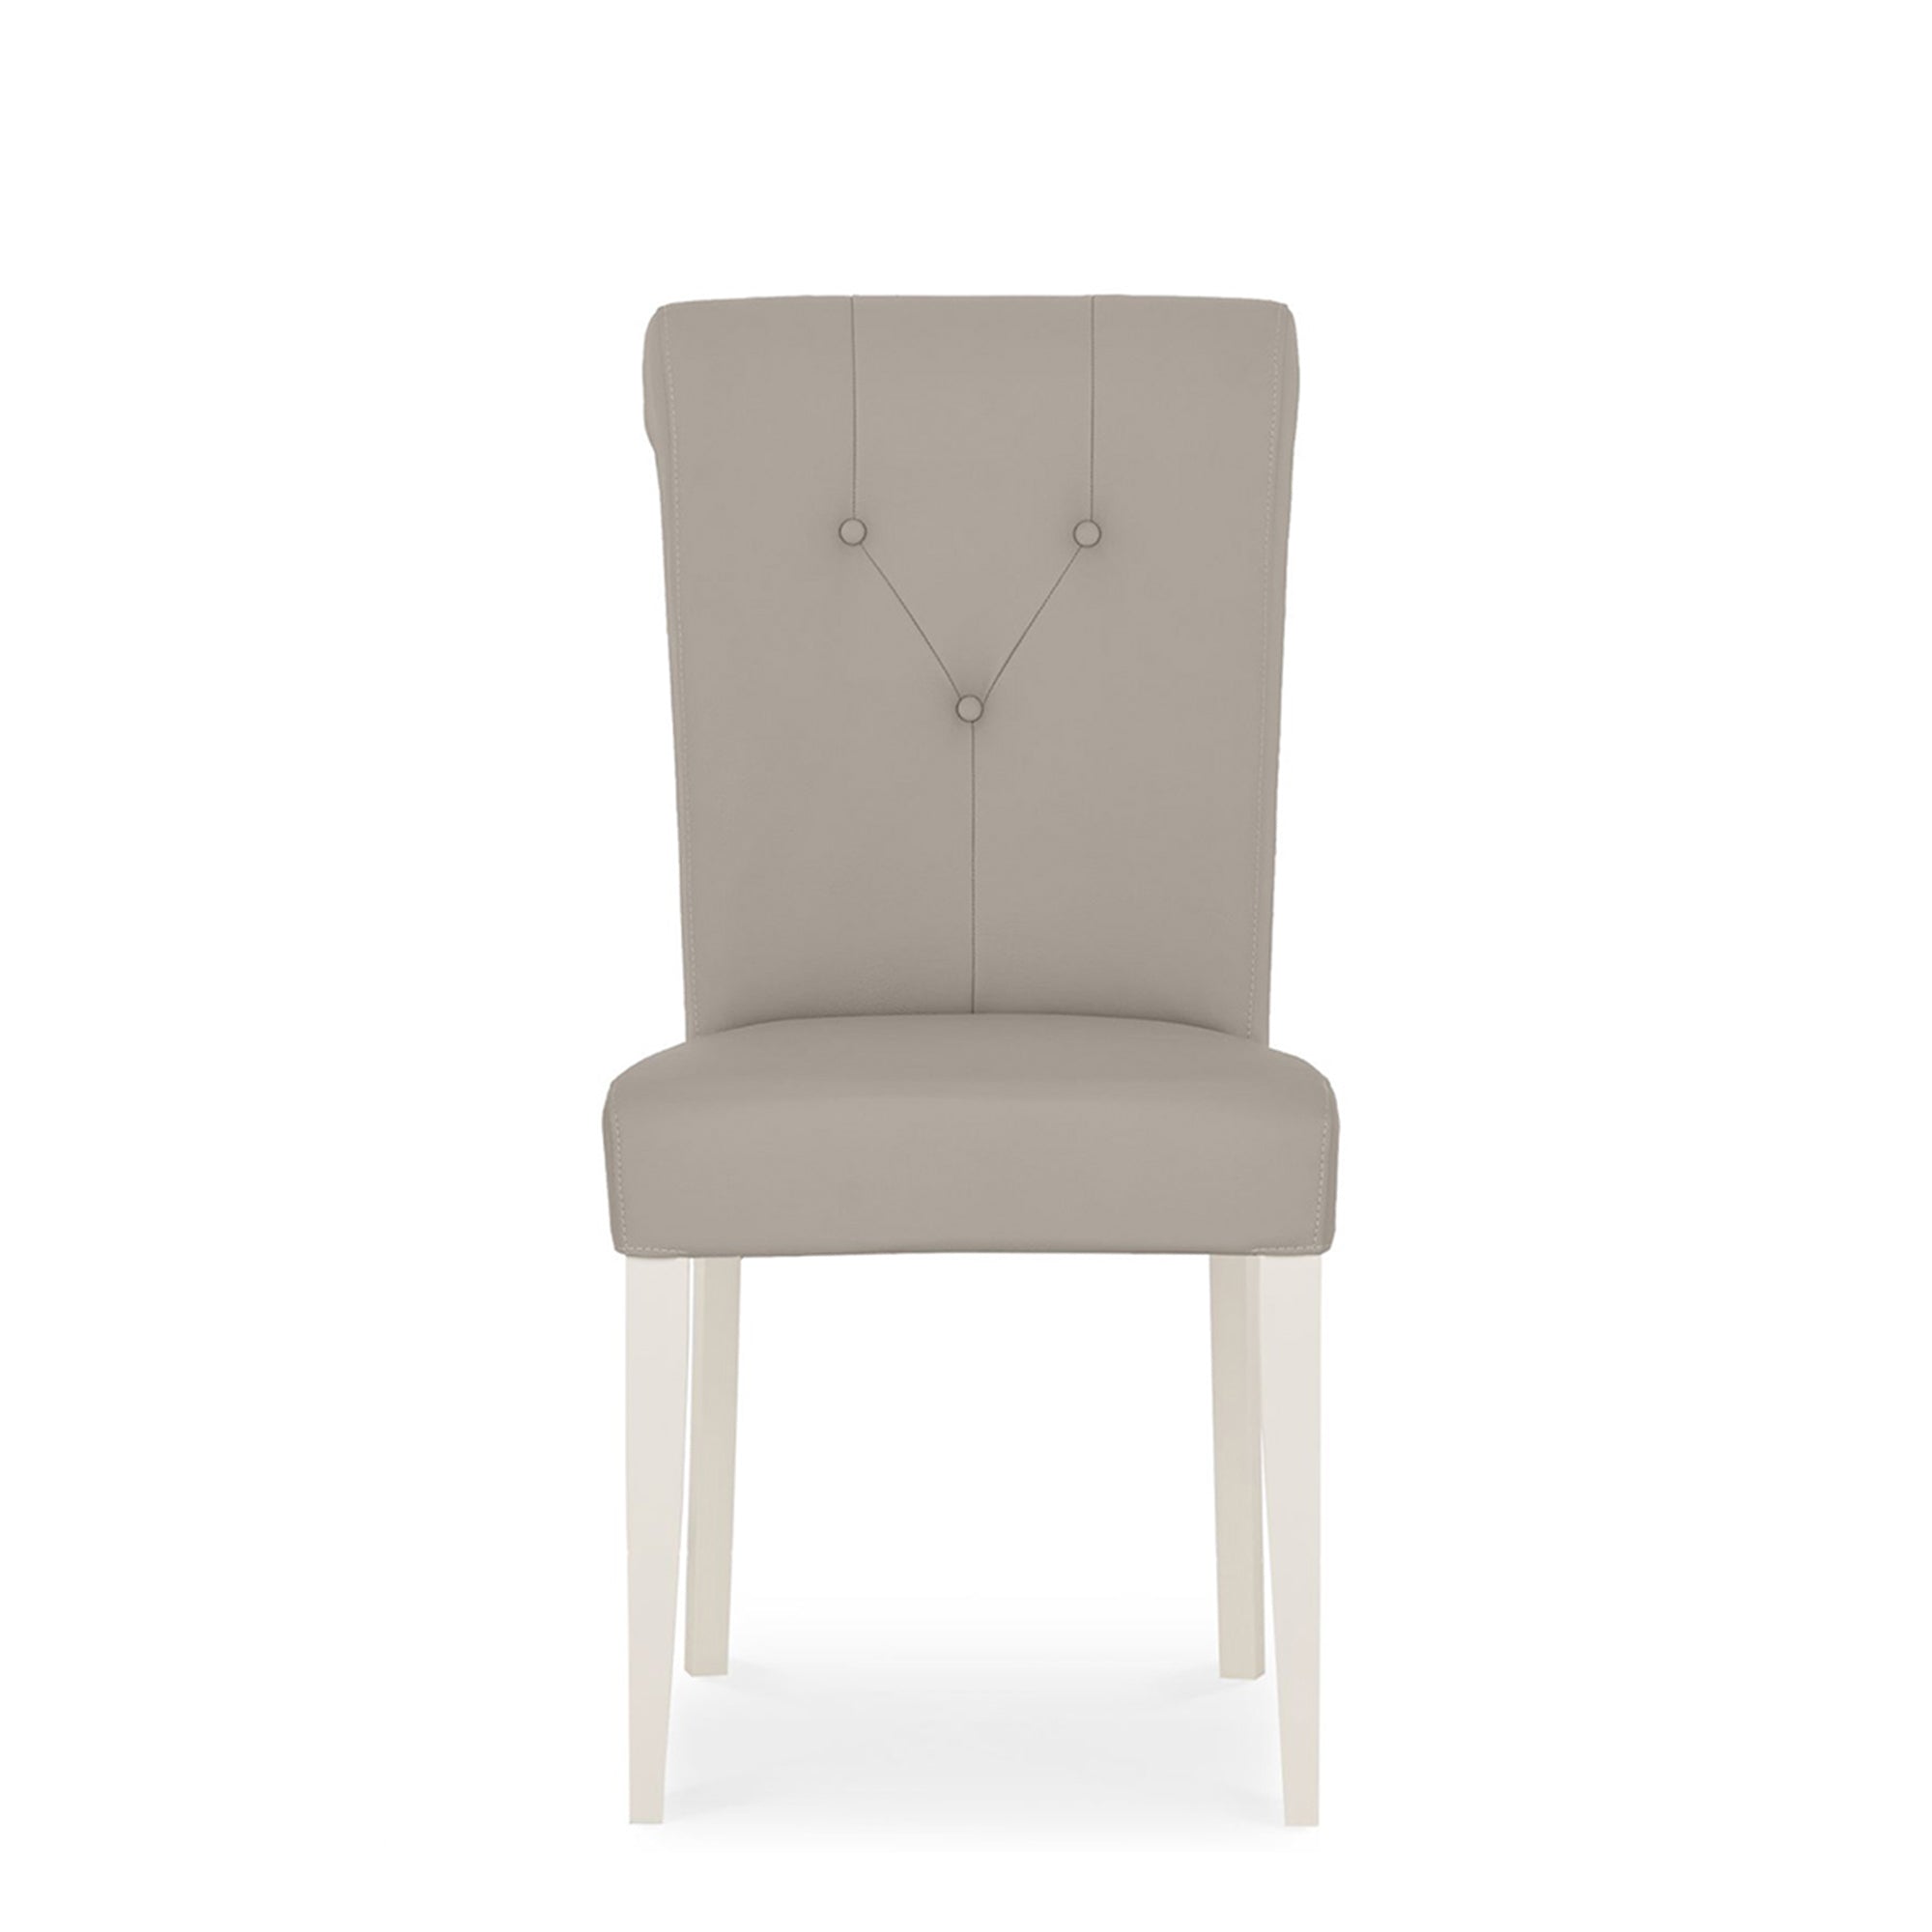 Chateau - Soft Grey Upholstered Bonded Leather Chair